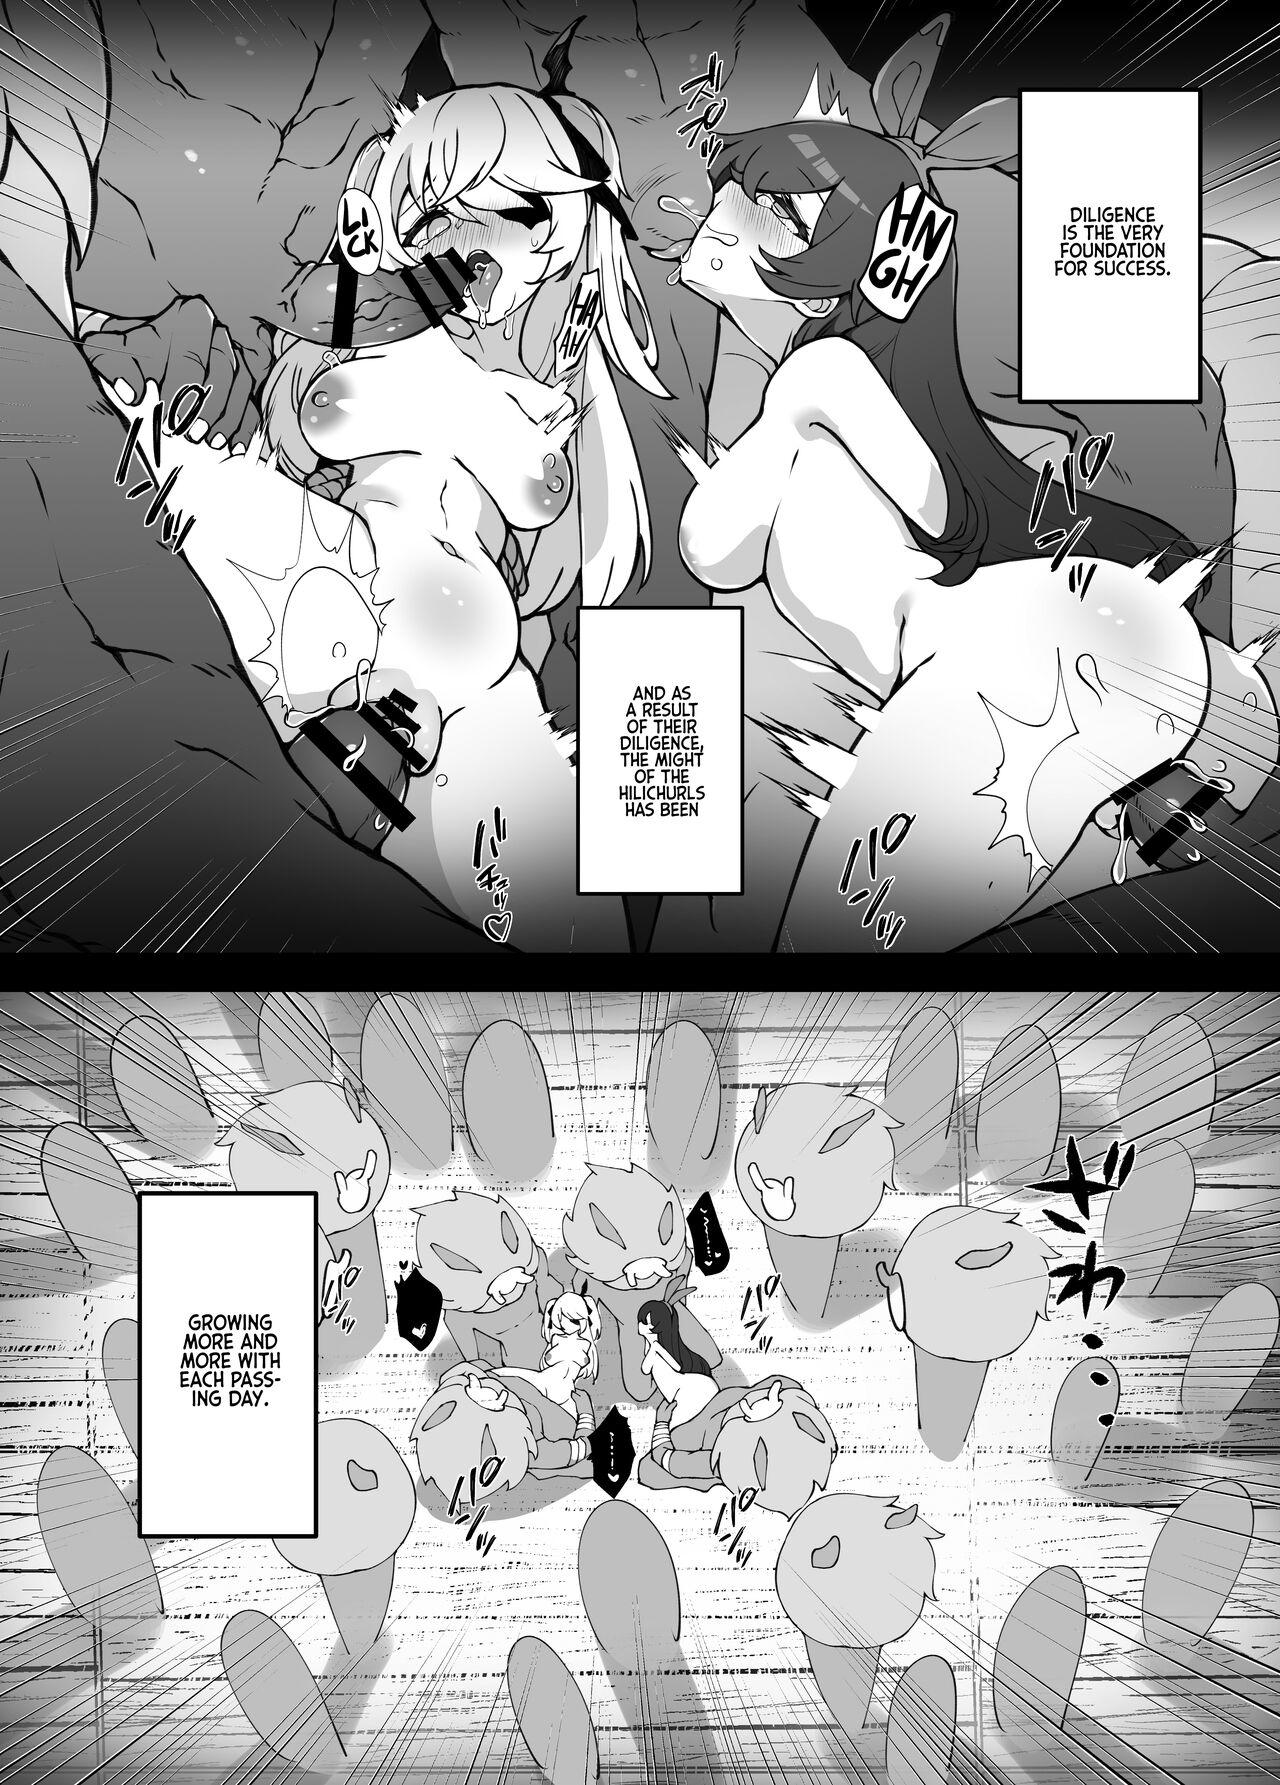 Futa [Karouke (Karou)] The Attack of the Hilichurls II ~The Invasion's Prelude~ Noelle,Chivalric Blossom that withered~ (Genshin Impact) [English] [Kyuume] [Digital] - Genshin impact Perfect Tits - Page 5